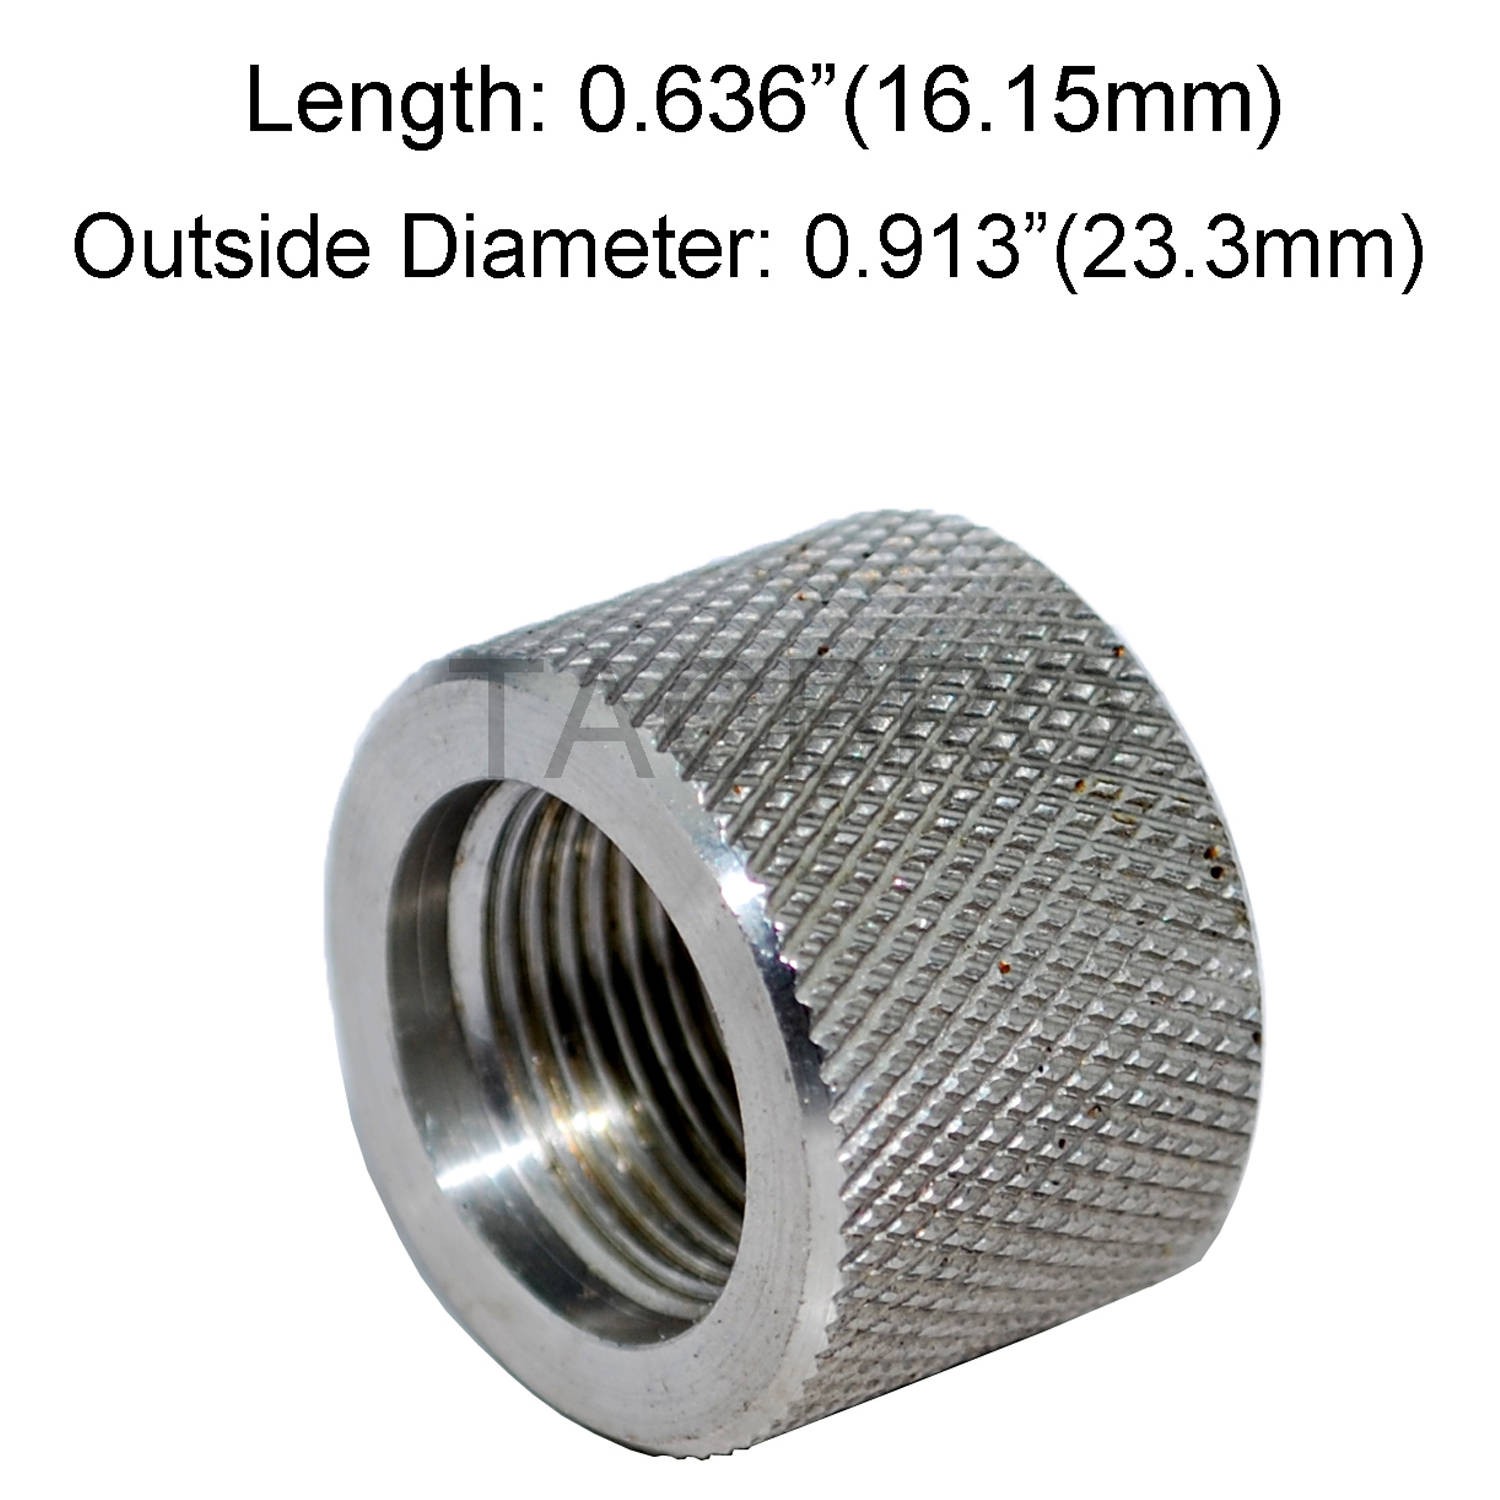 308 Stainless Steel Thread Protector,5/8x24 Pitch Thread,.936 With Crush Washe, 